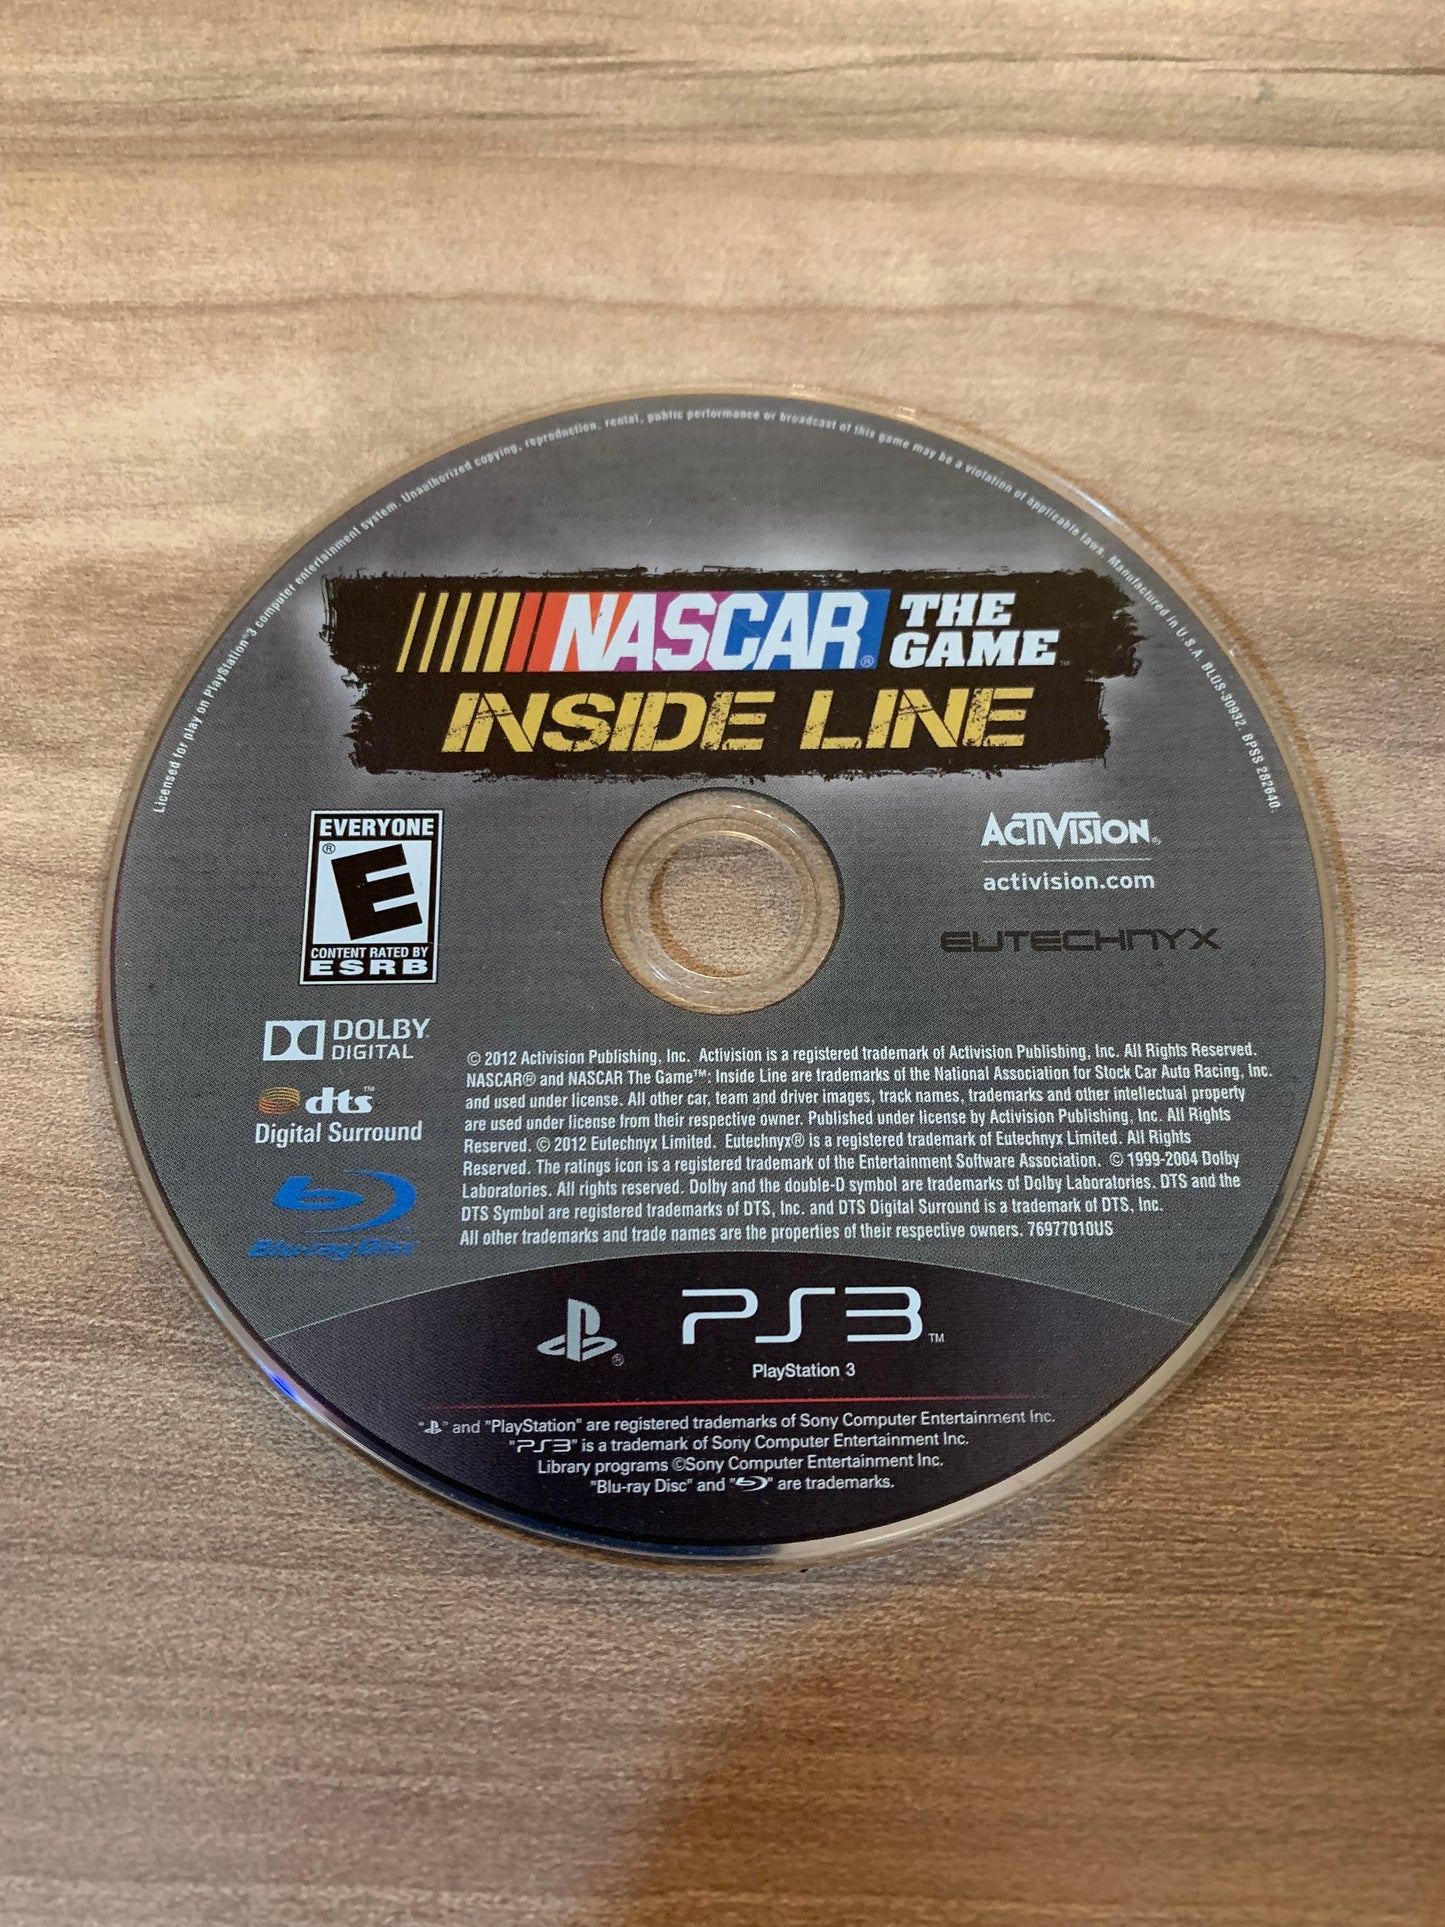 PiXEL-RETRO.COM : SONY PLAYSTATION 3 (PS3) GAME NTSC NASCAR THE GAME INSIDE LINE